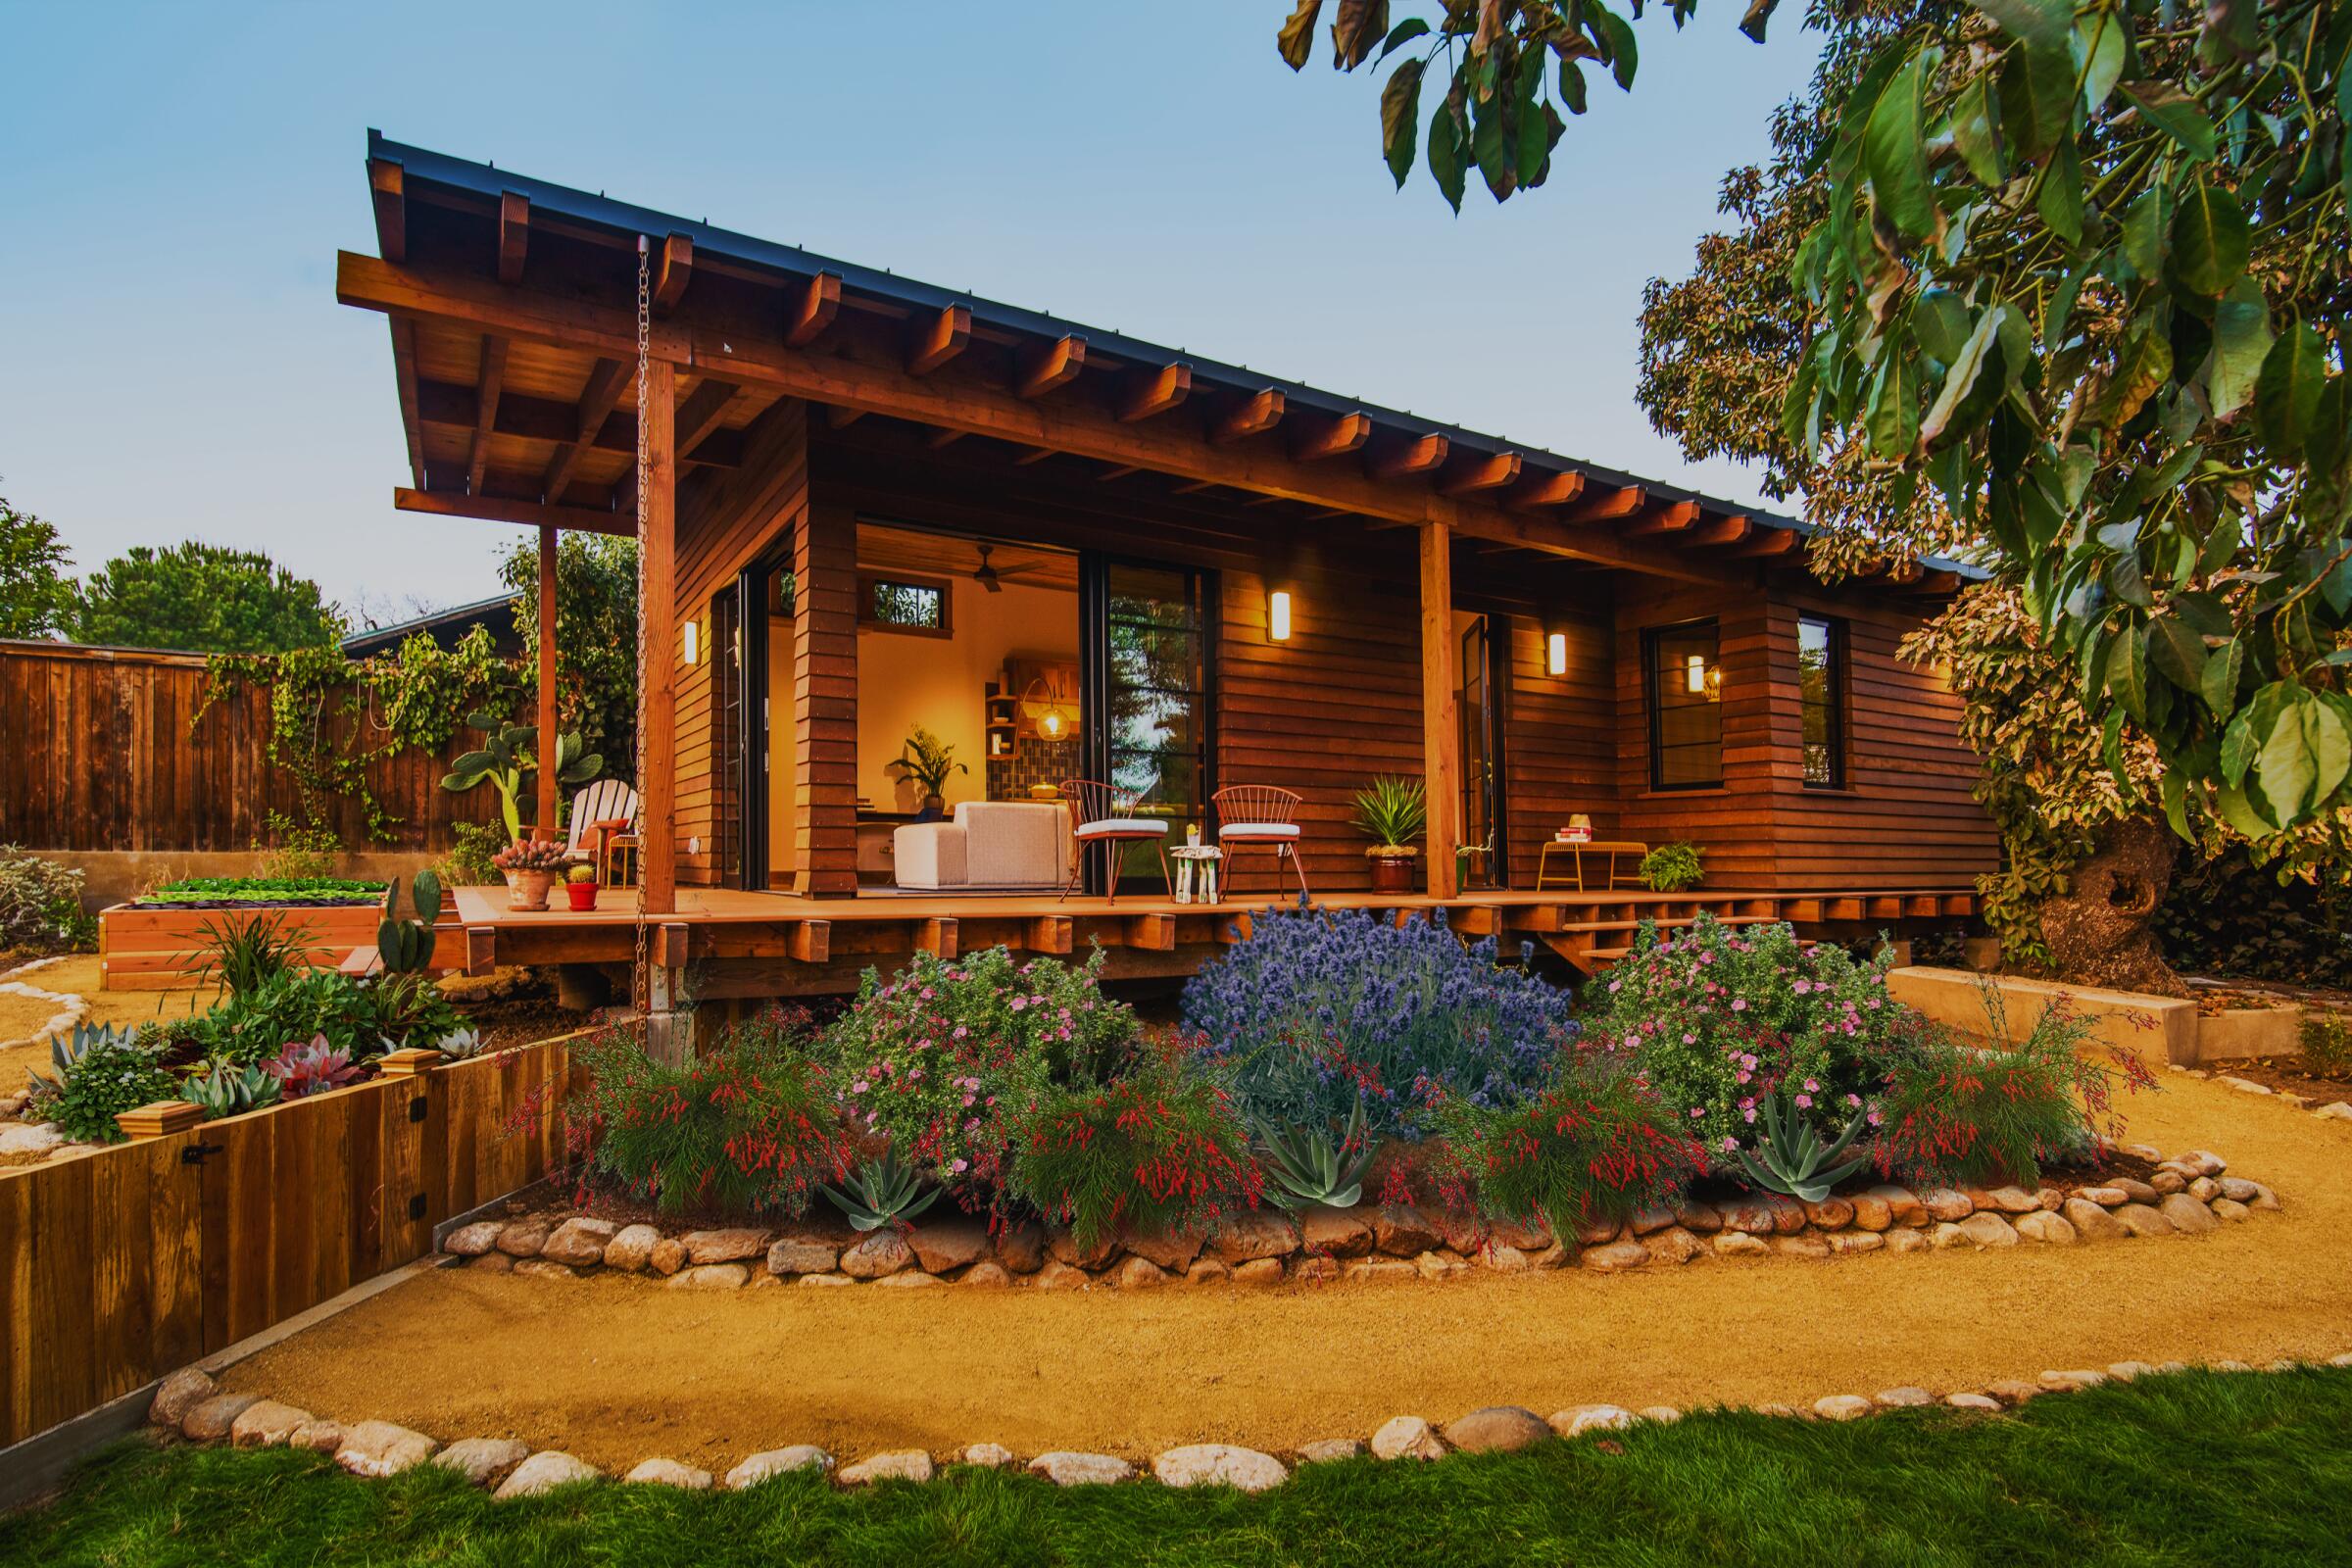 An exterior shot of a quaint 'granny flat' with redwood siding and a wraparound deck